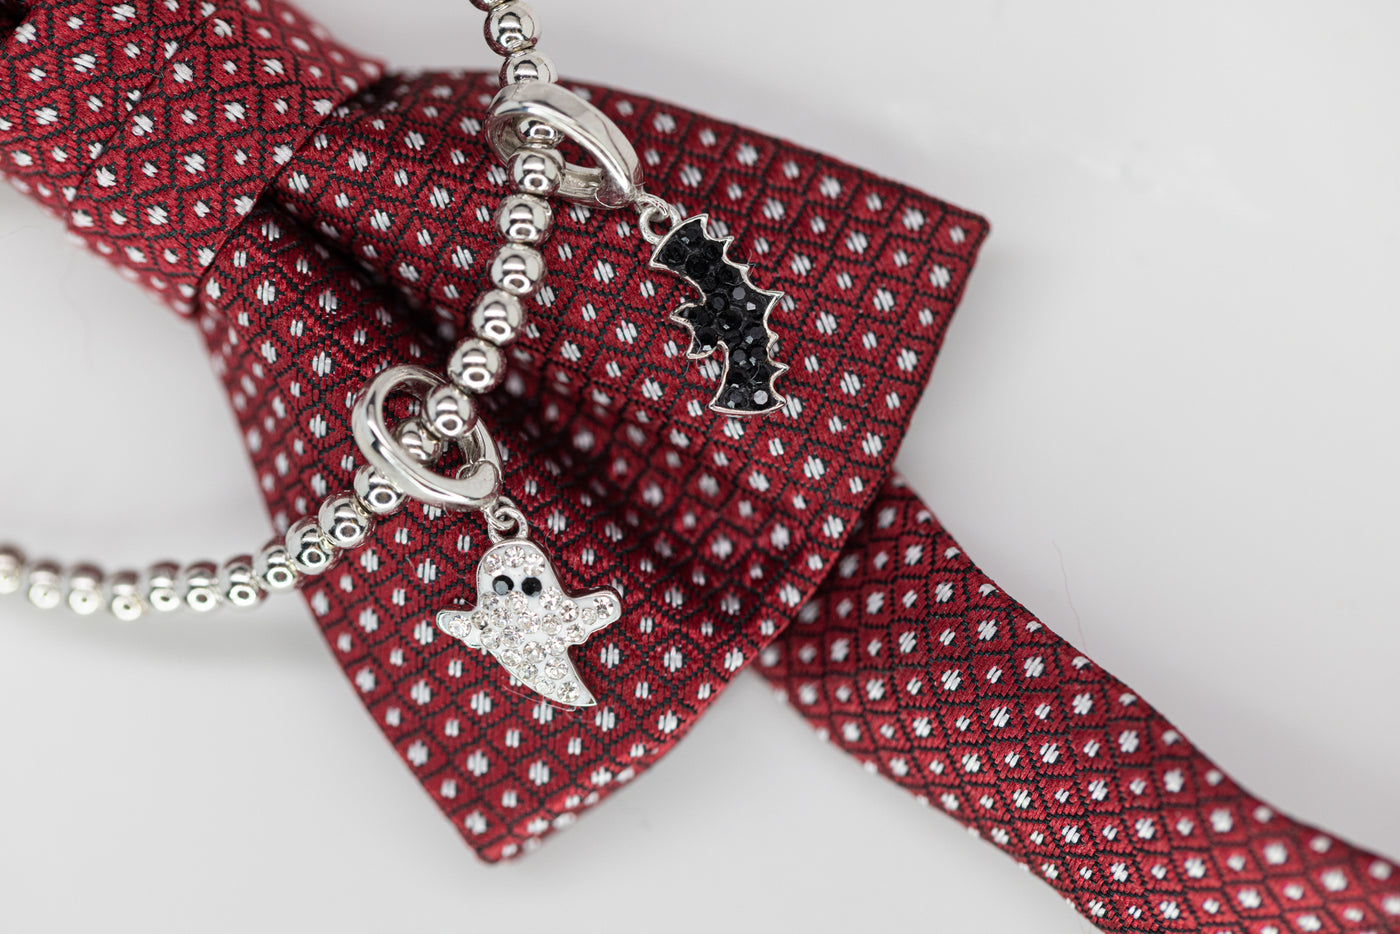 Bat Crystal Sterling Silver Charm with White Ghost Charm